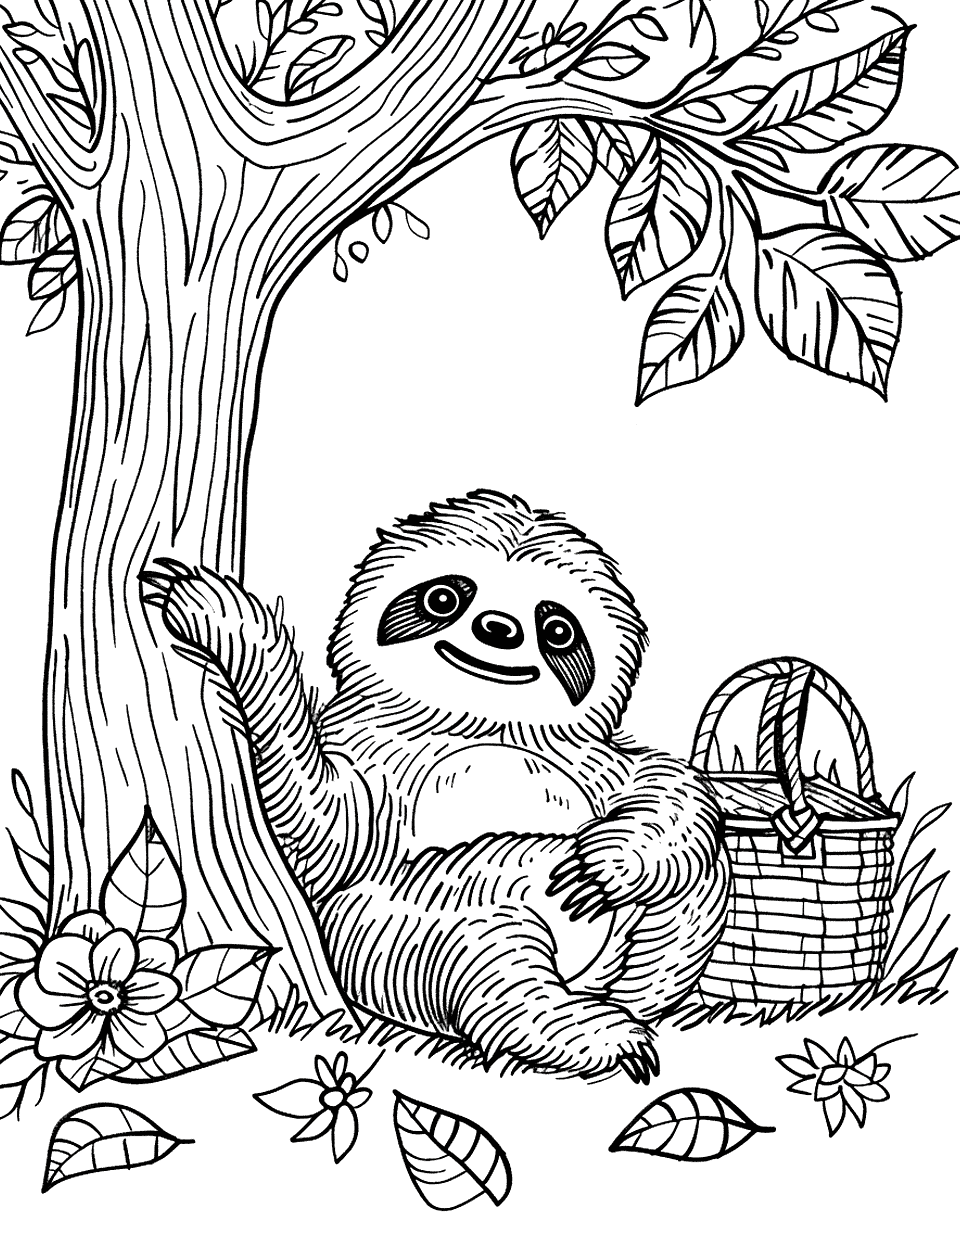 Sloth at a Picnic Coloring Page - A simple picnic scene with a sloth sitting next to a picnic basket under a tree.